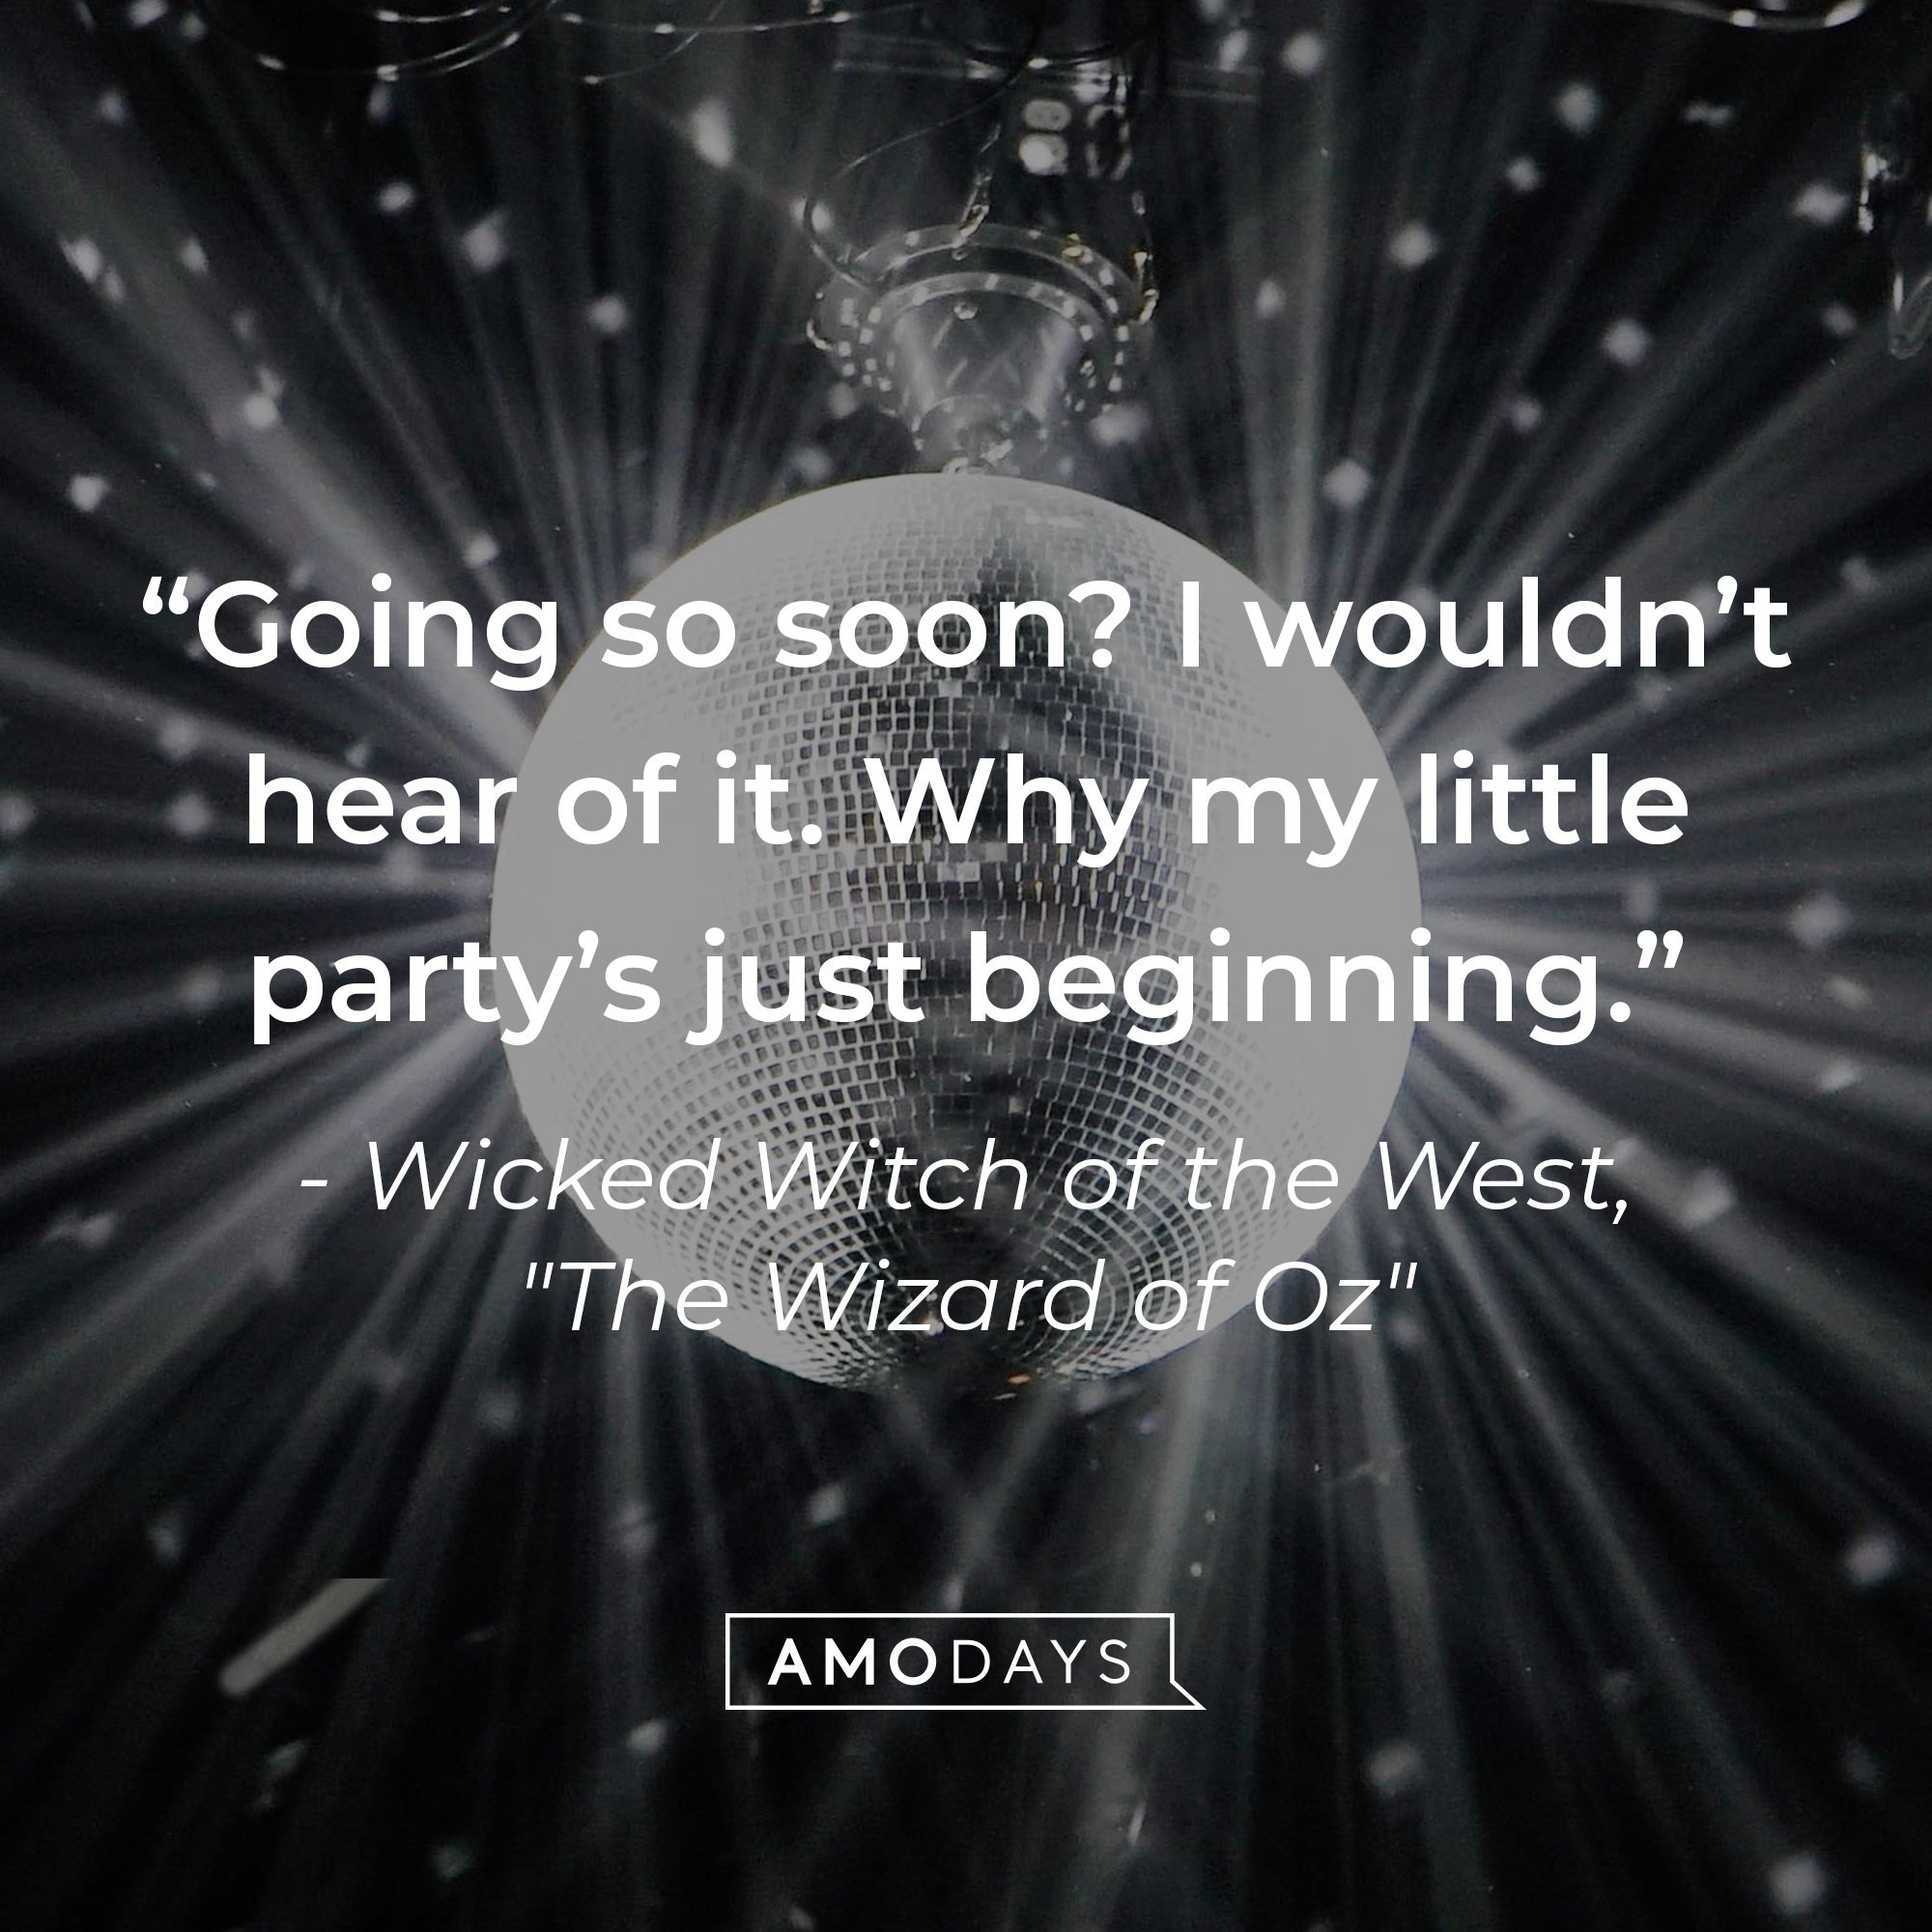 The Wicked Witch of The West's quote: "Going so soon? I wouldn't hear of it. Why my little party's only just beginning." | Image: AmoDays 